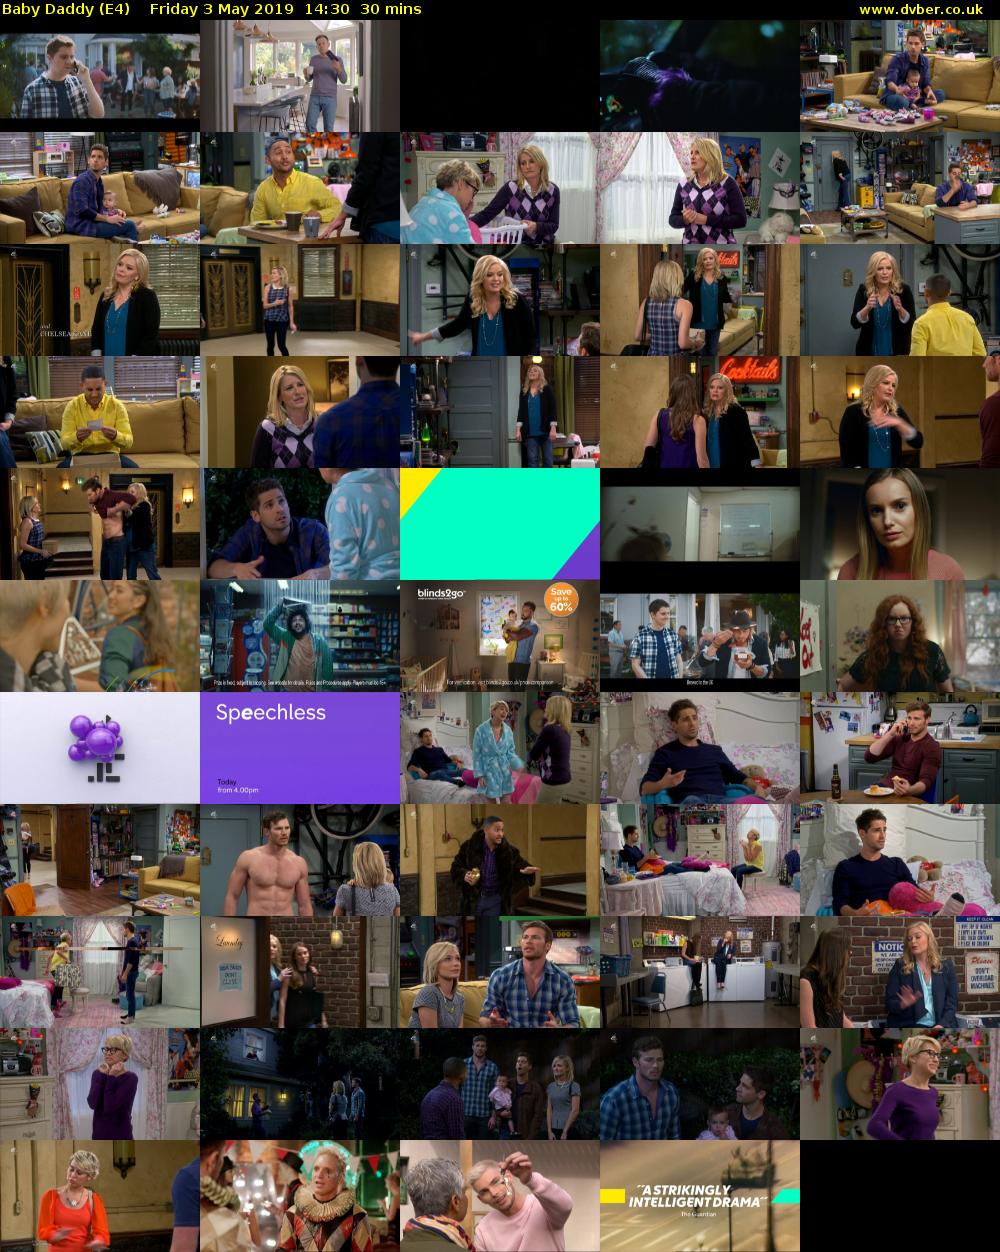 Baby Daddy (E4) Friday 3 May 2019 14:30 - 15:00